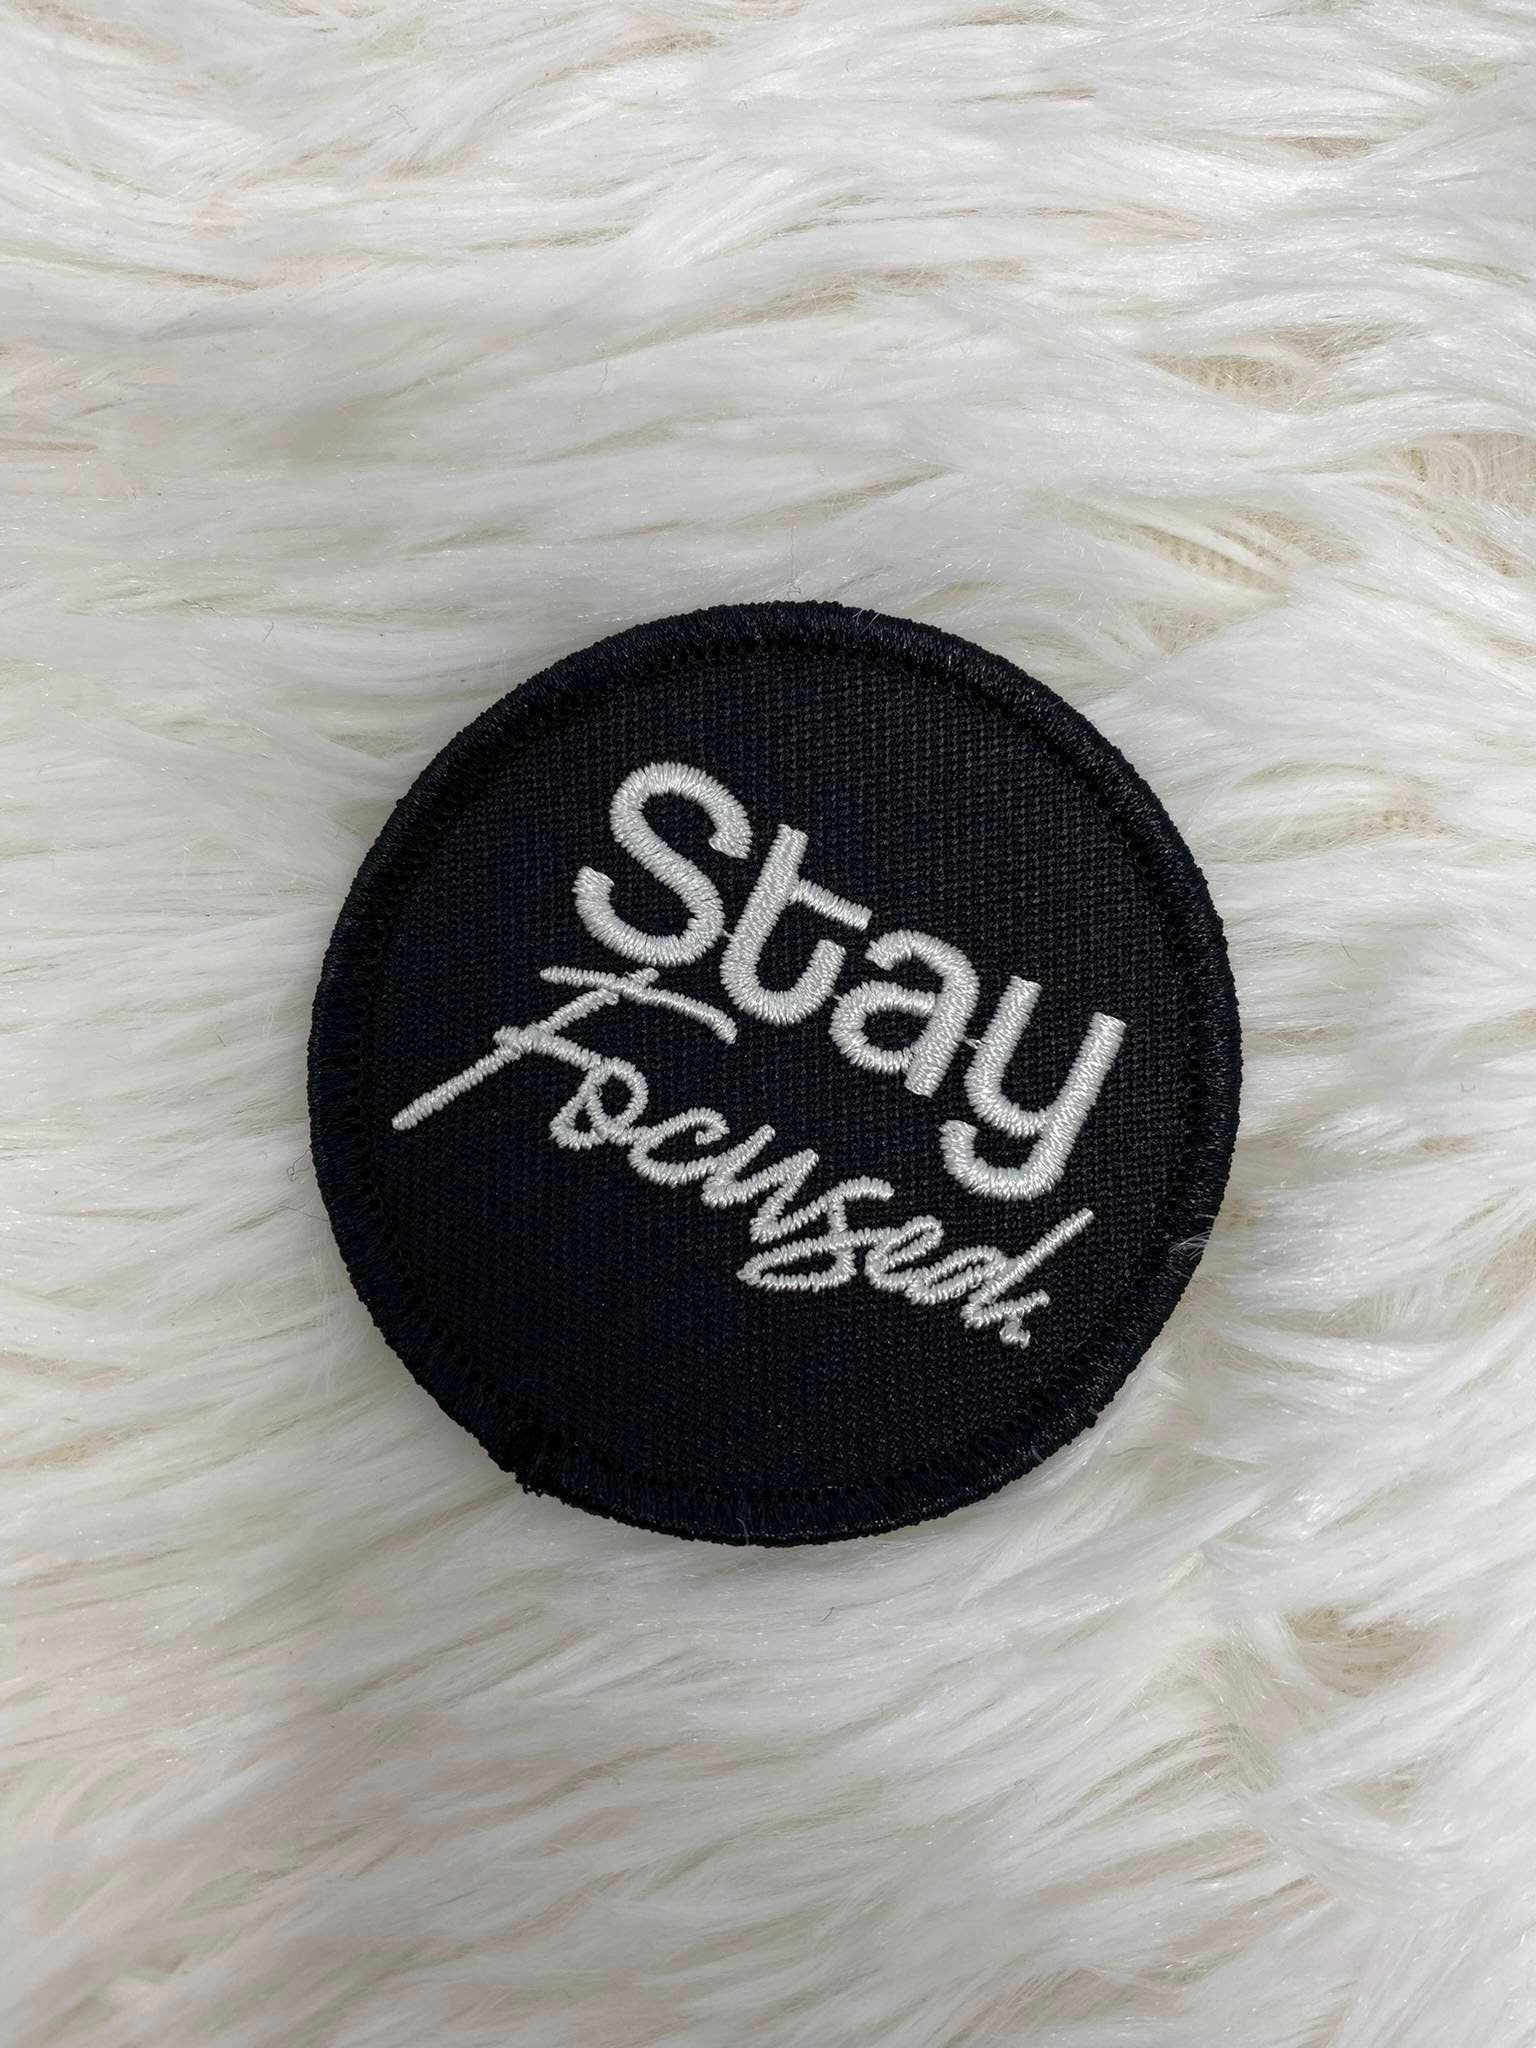 Inspirational,"Stay Focused" Black & White, Iron-on Embroidered Badge, Size 2.75", Minimalist Patch for Hats, Crocs, Apparel and Accessories